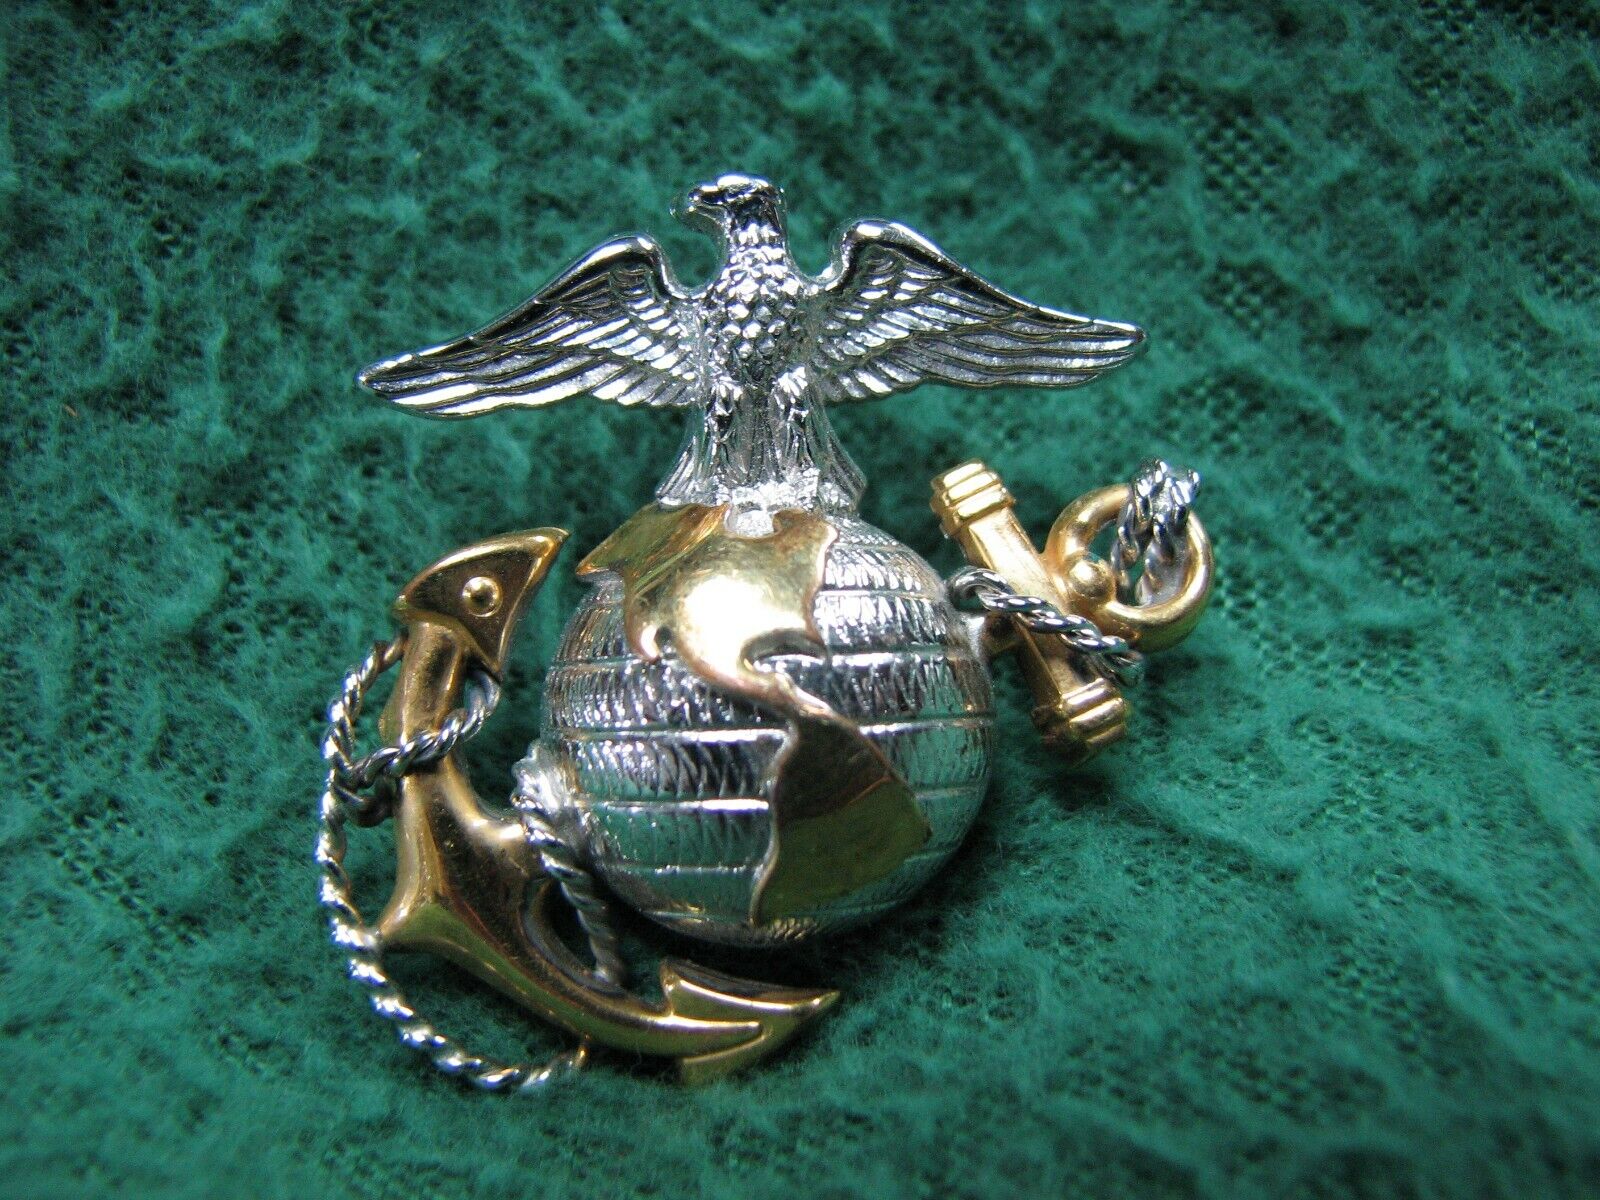 U.S. Military USMC  Marines  EAGLE EARTH & ANCHOR Pin  Sterling & Gold Filled